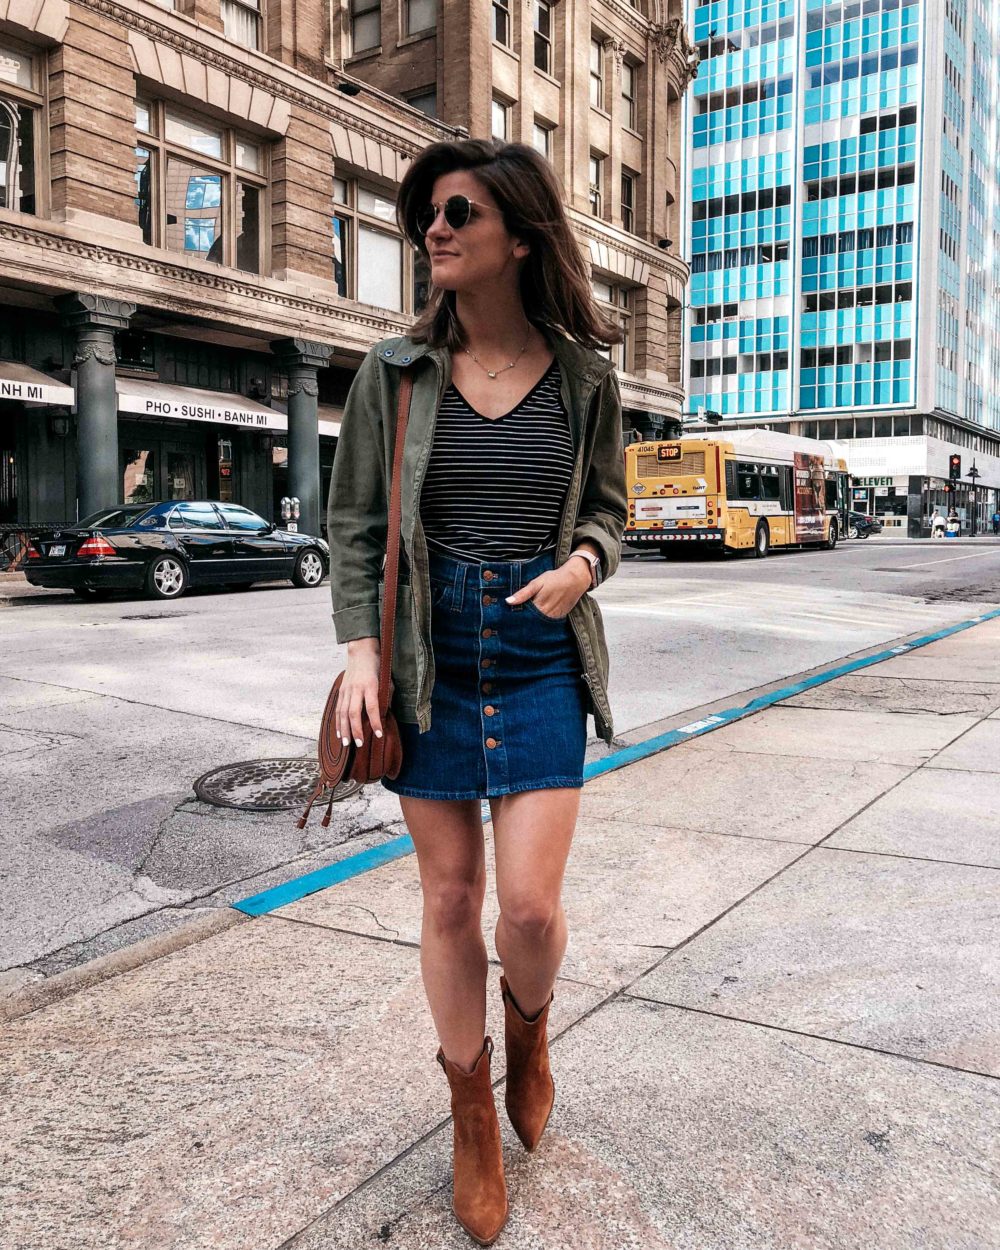 miltiary jacket outfit with denim skirt, striped tank, and booties